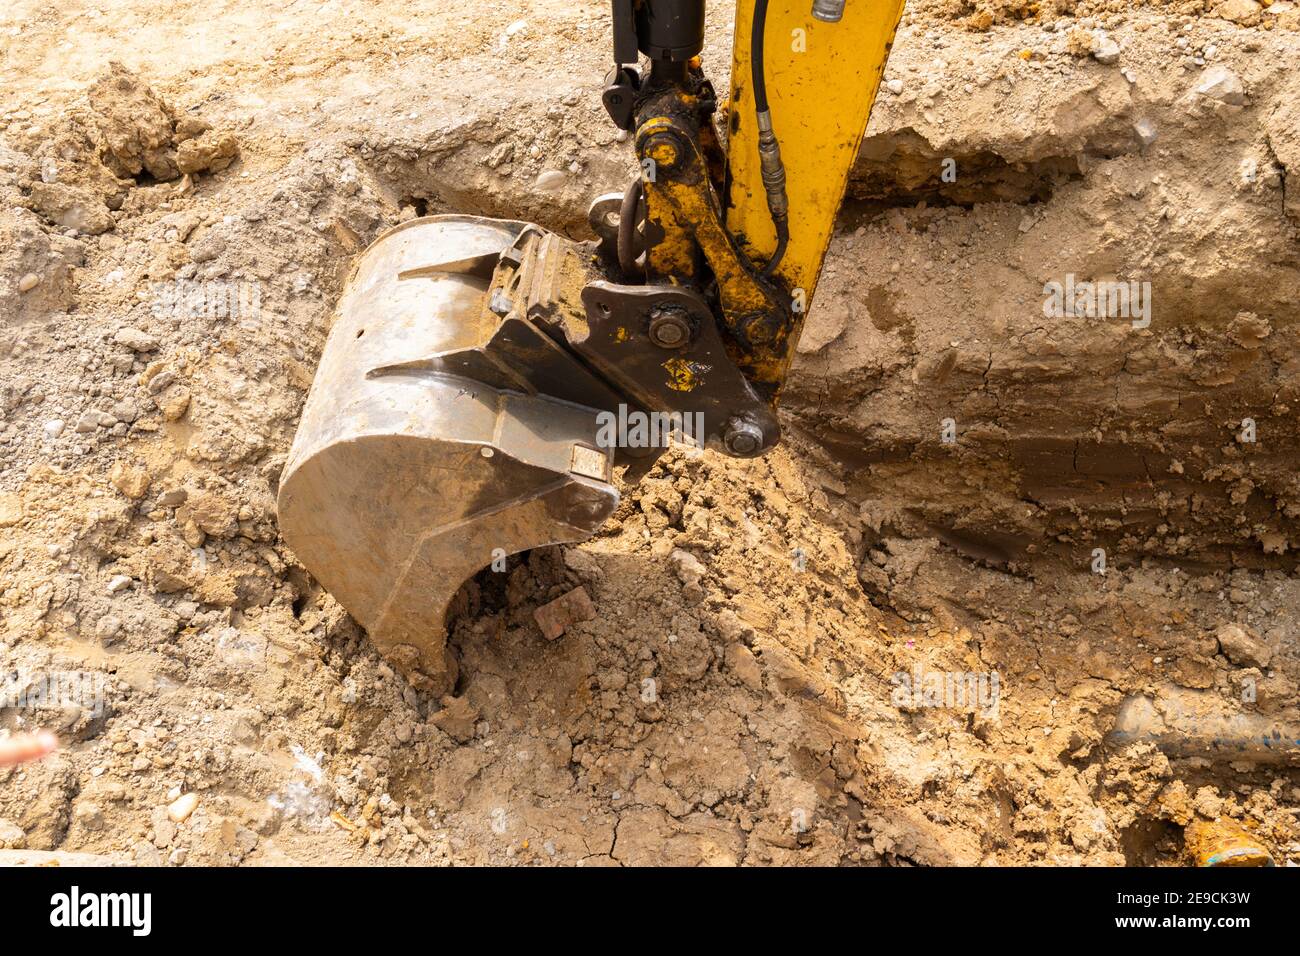 close up view of an excavator claw scoop digging a trench Stock Photo